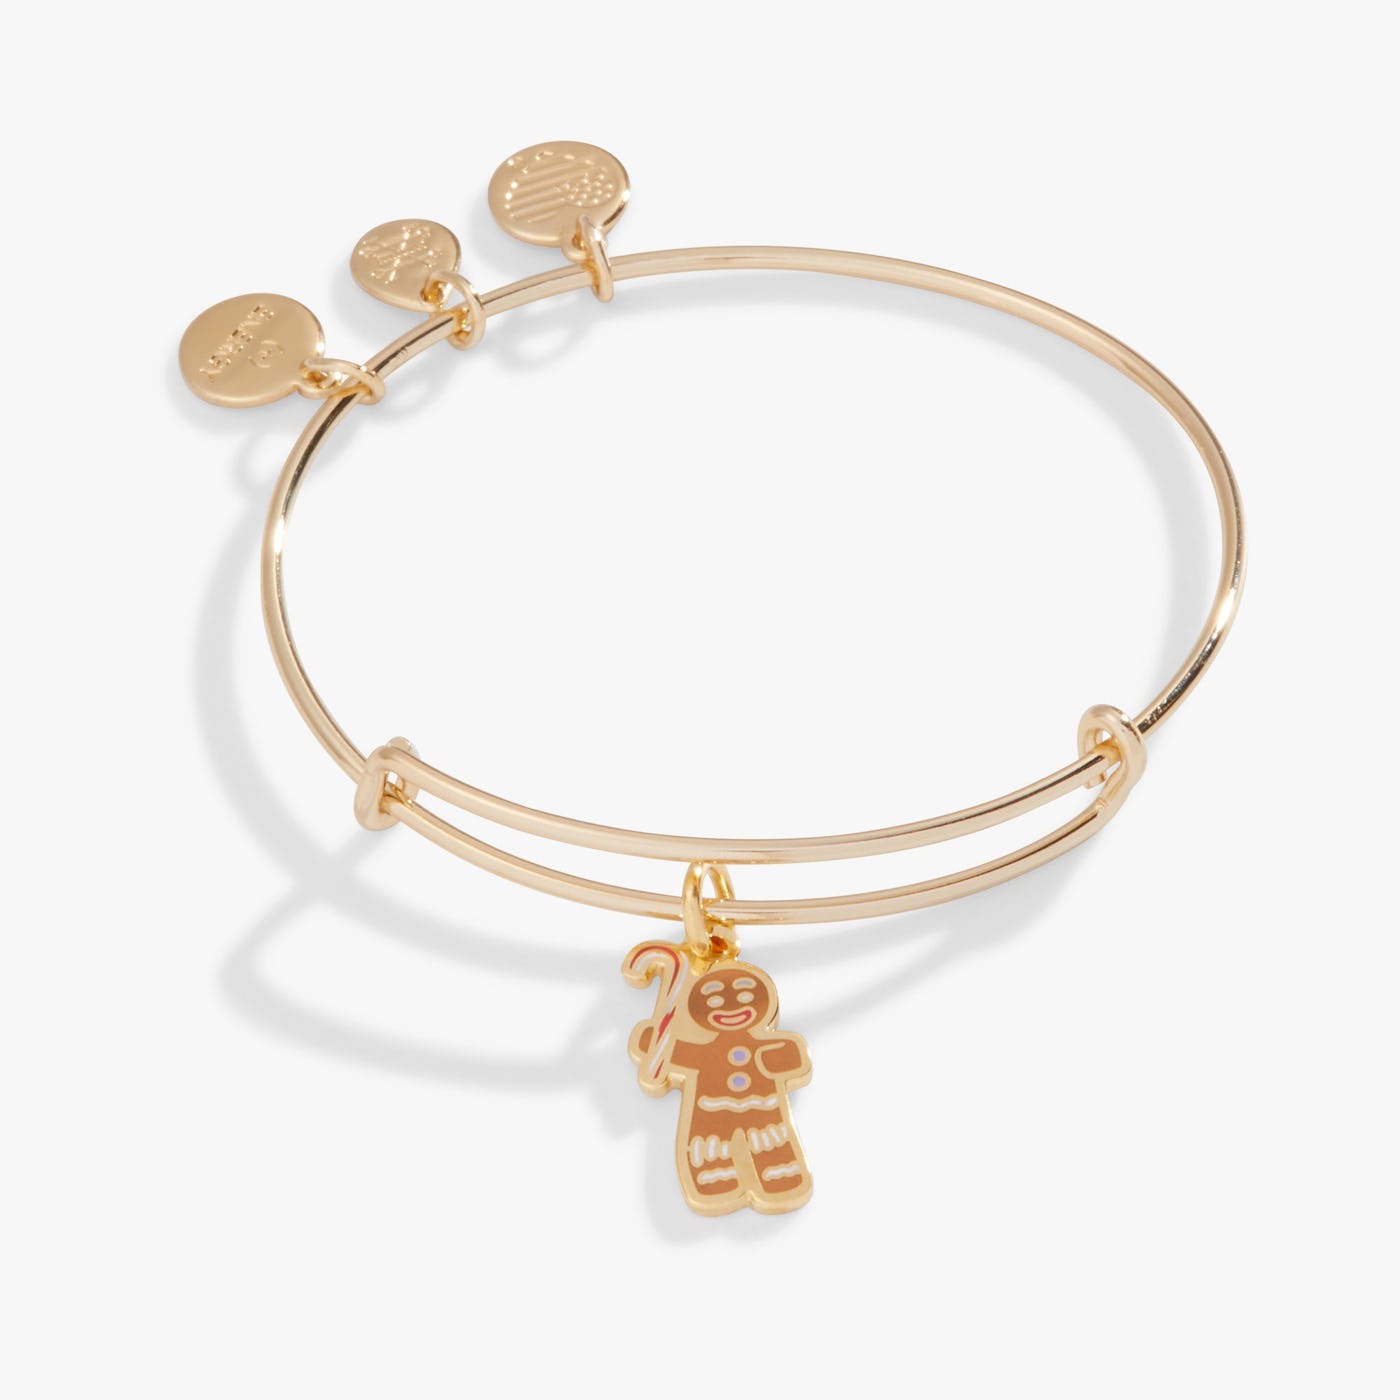 Gold bangle bracelet with a ginger bread man charm.